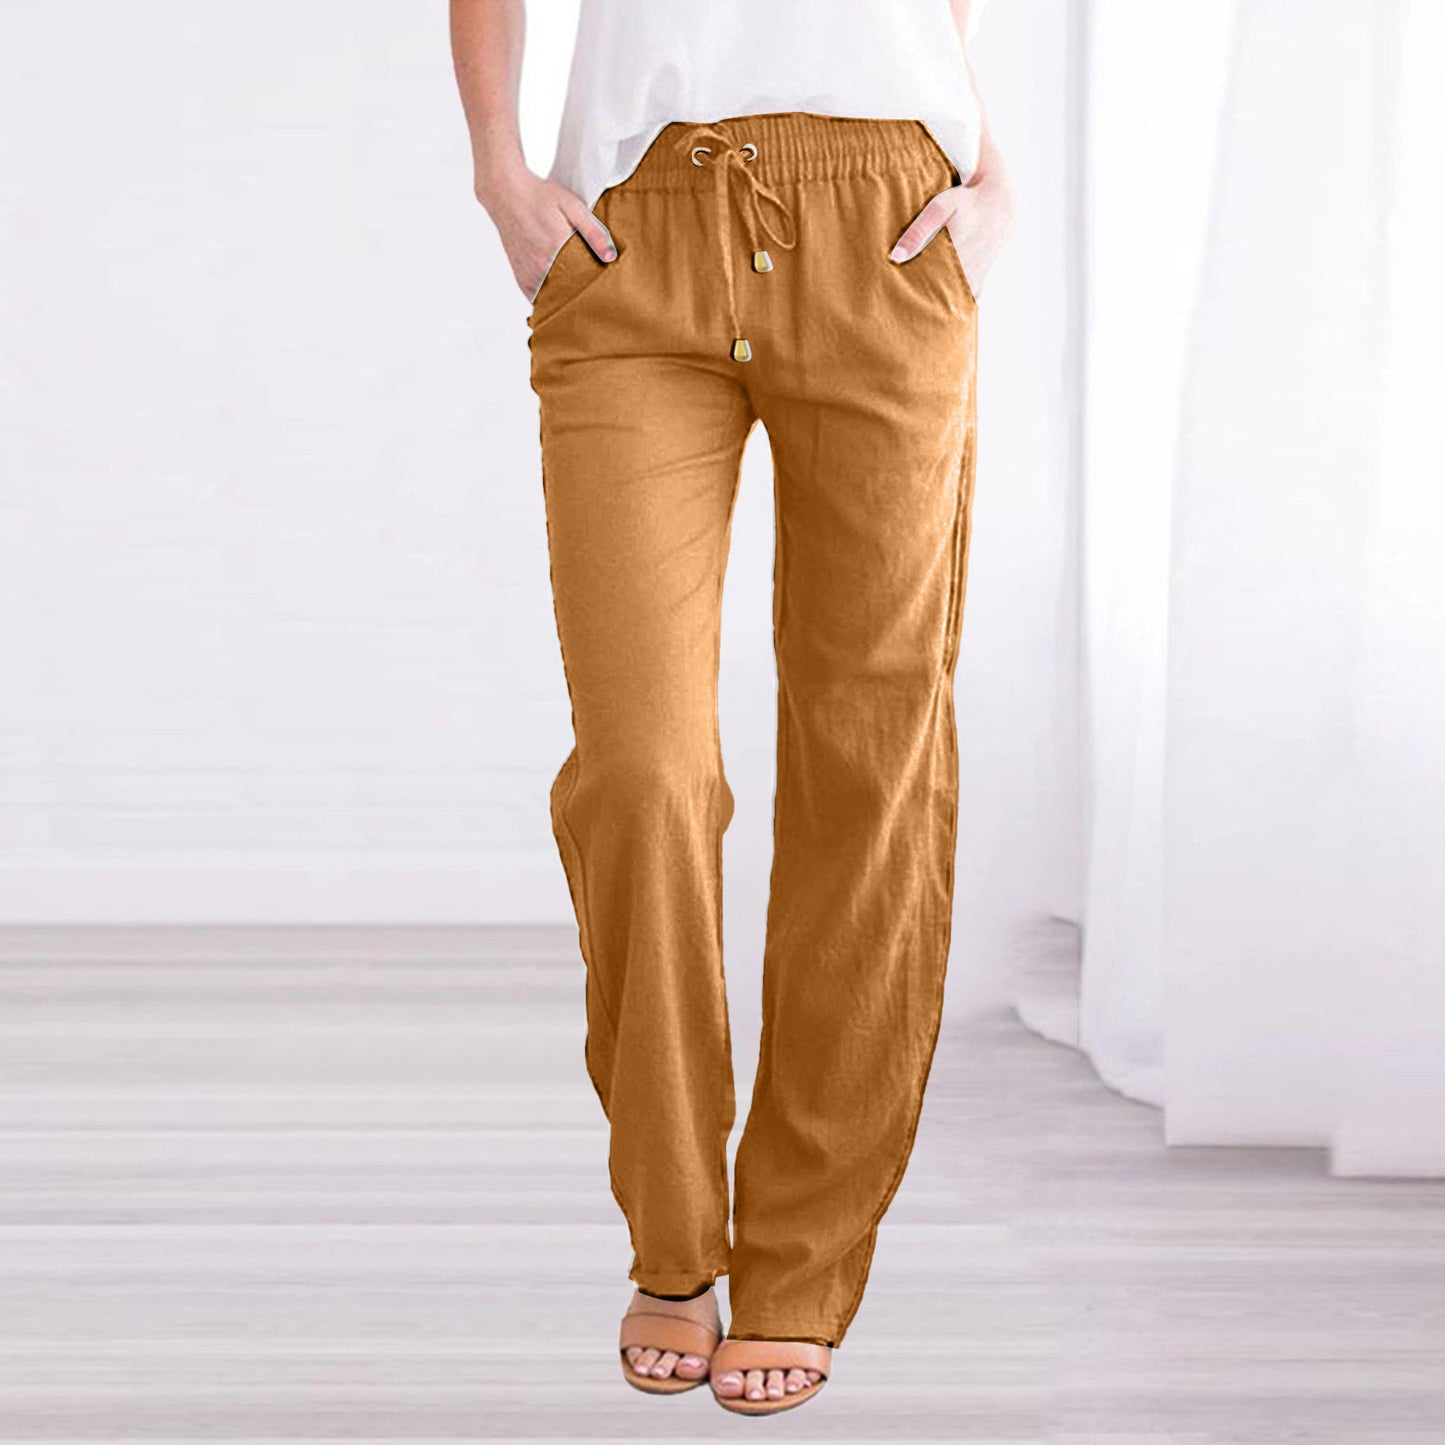 Women's Outdoor Casual Trousers